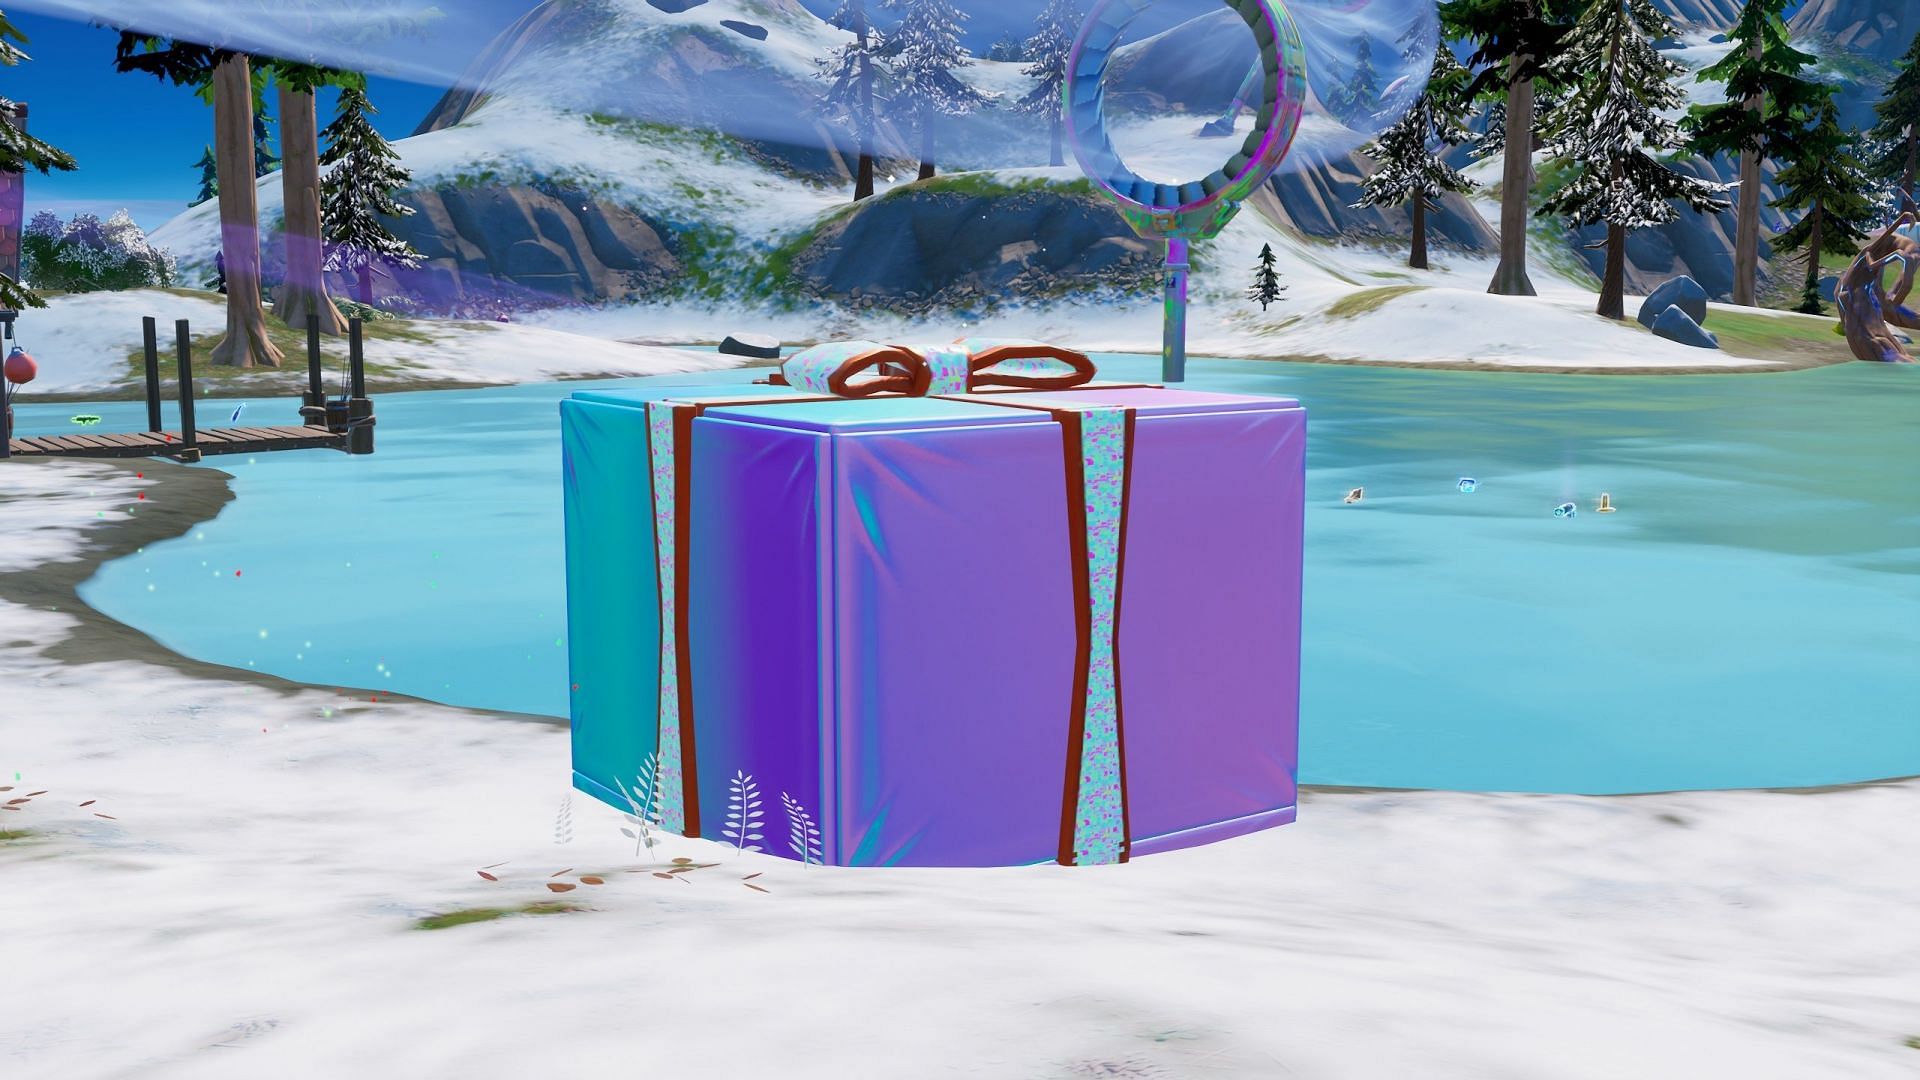 Fortnite birthday presents have been unvaulted and need to be used for the new challenge (Image via Epic Games)